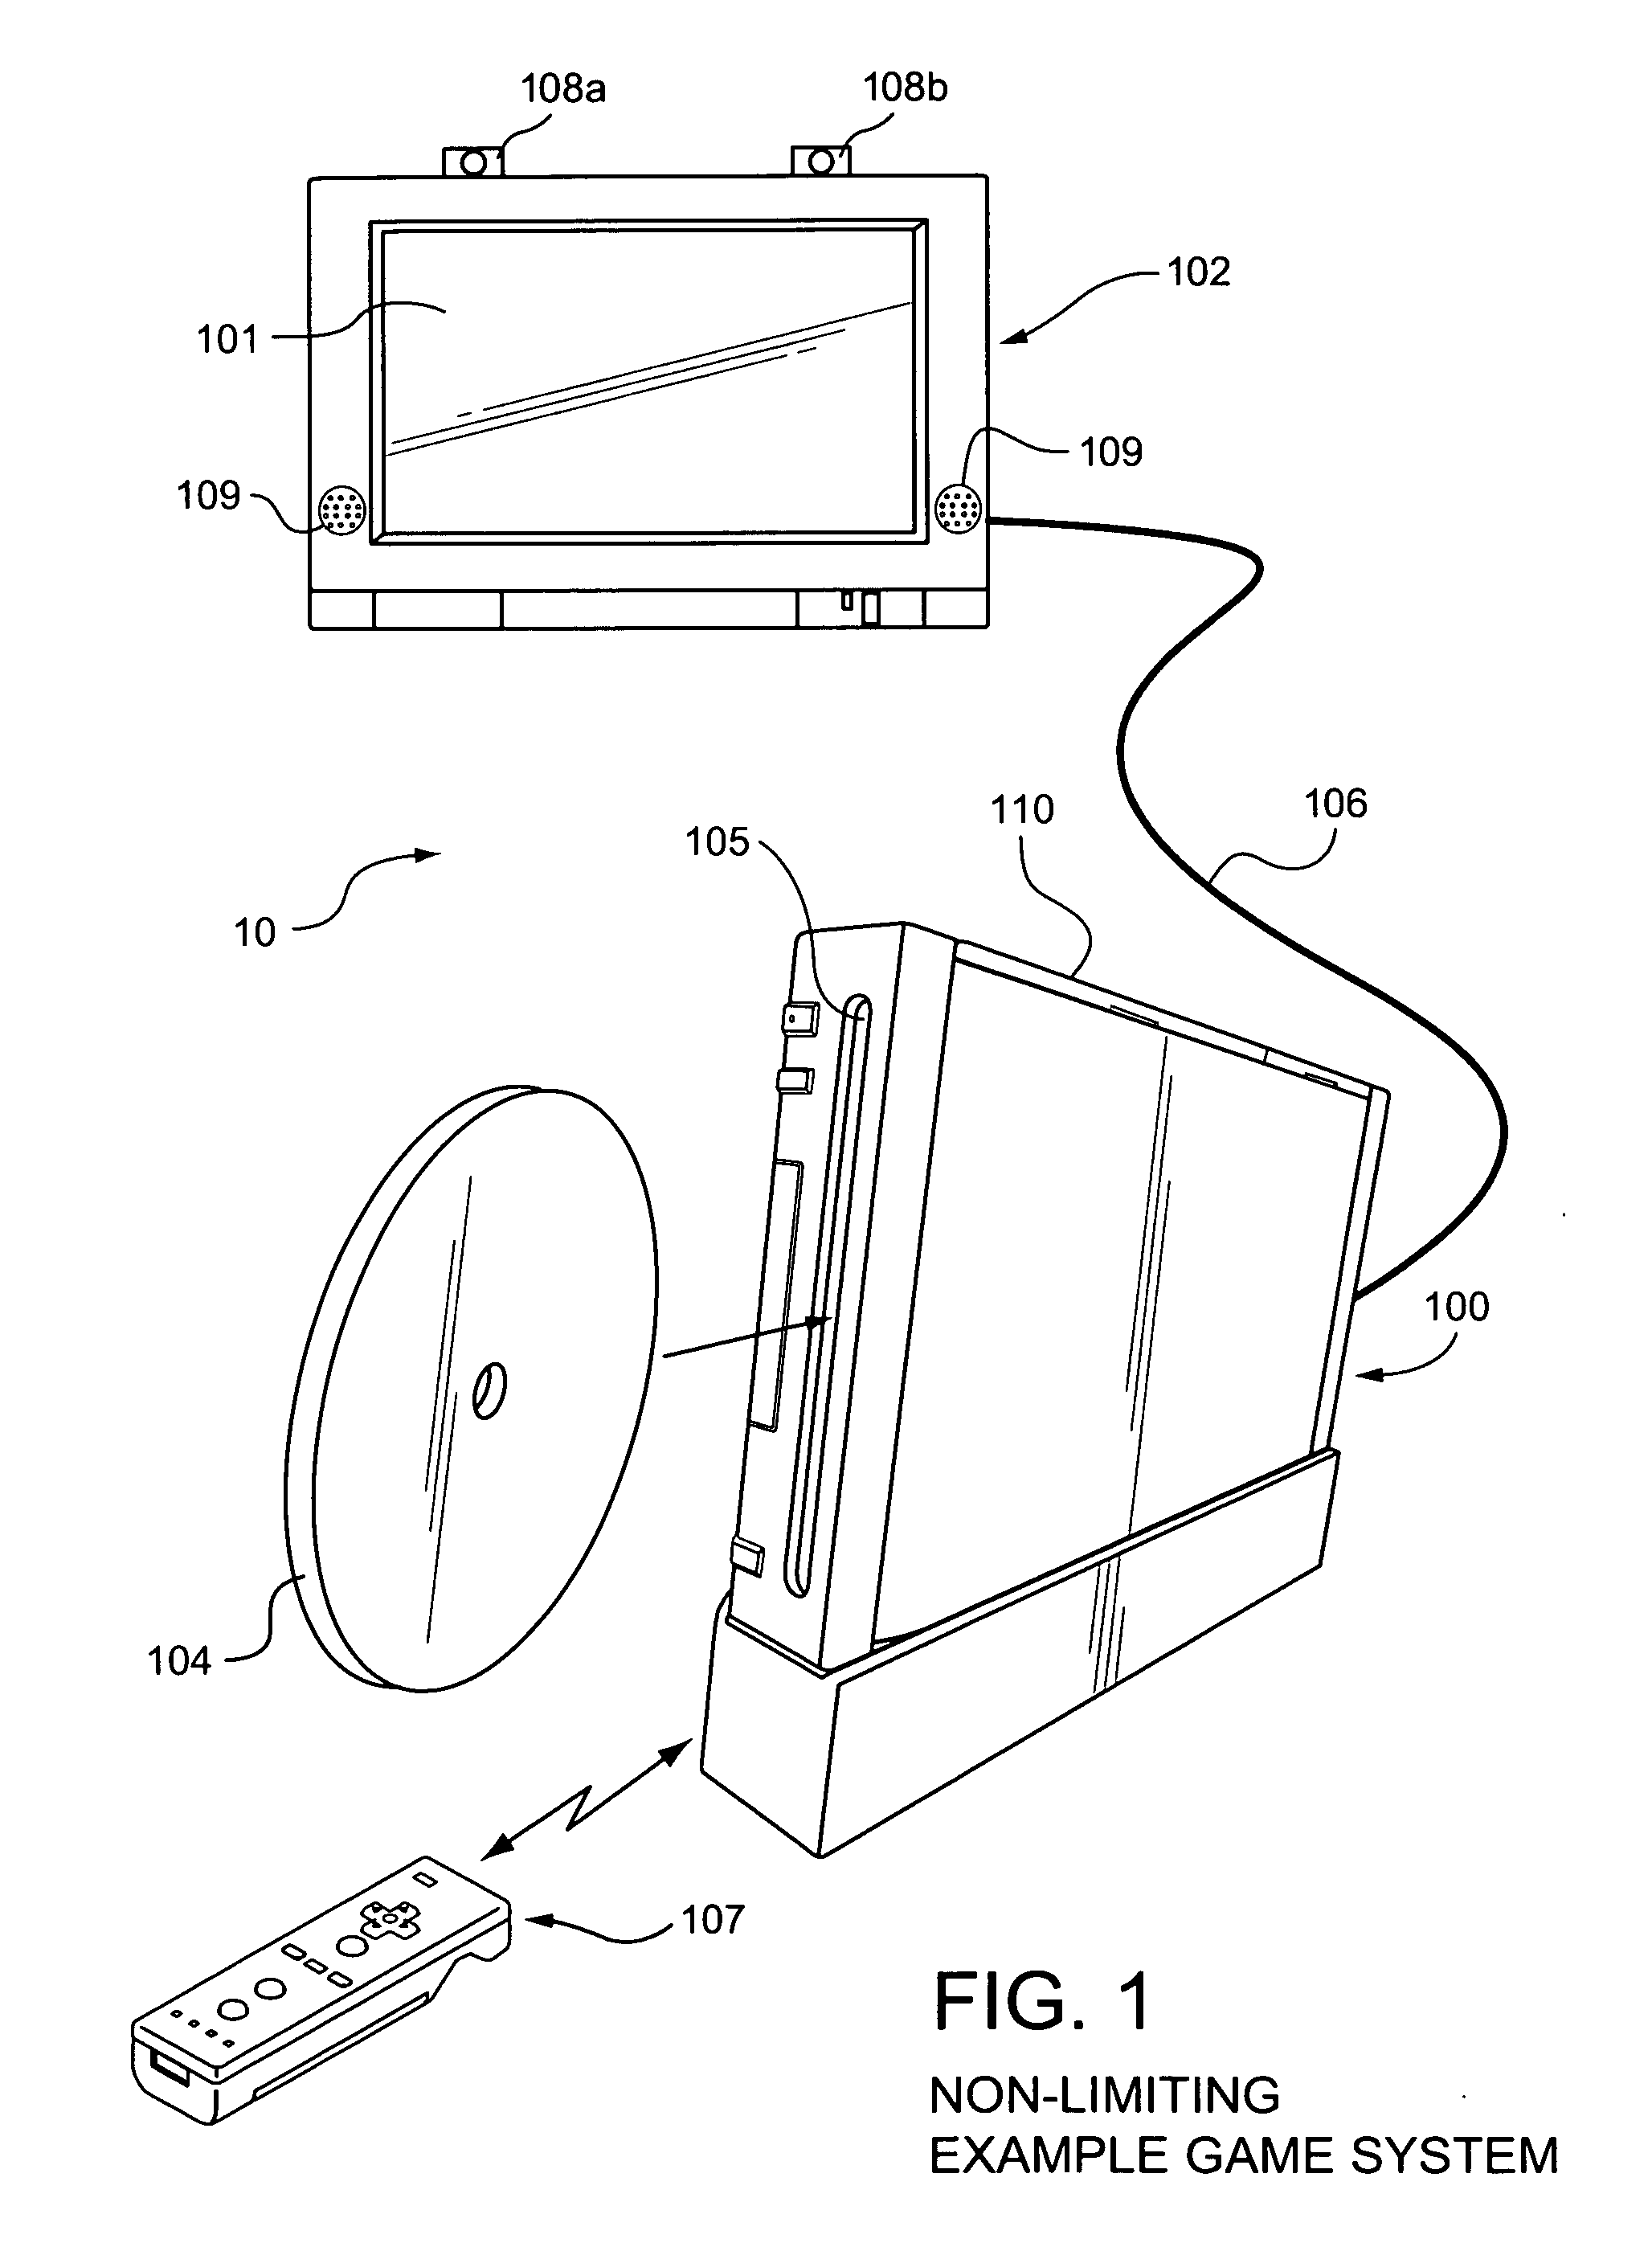 Method and apparatus for using a common pointing input to control 3D viewpoint and object targeting